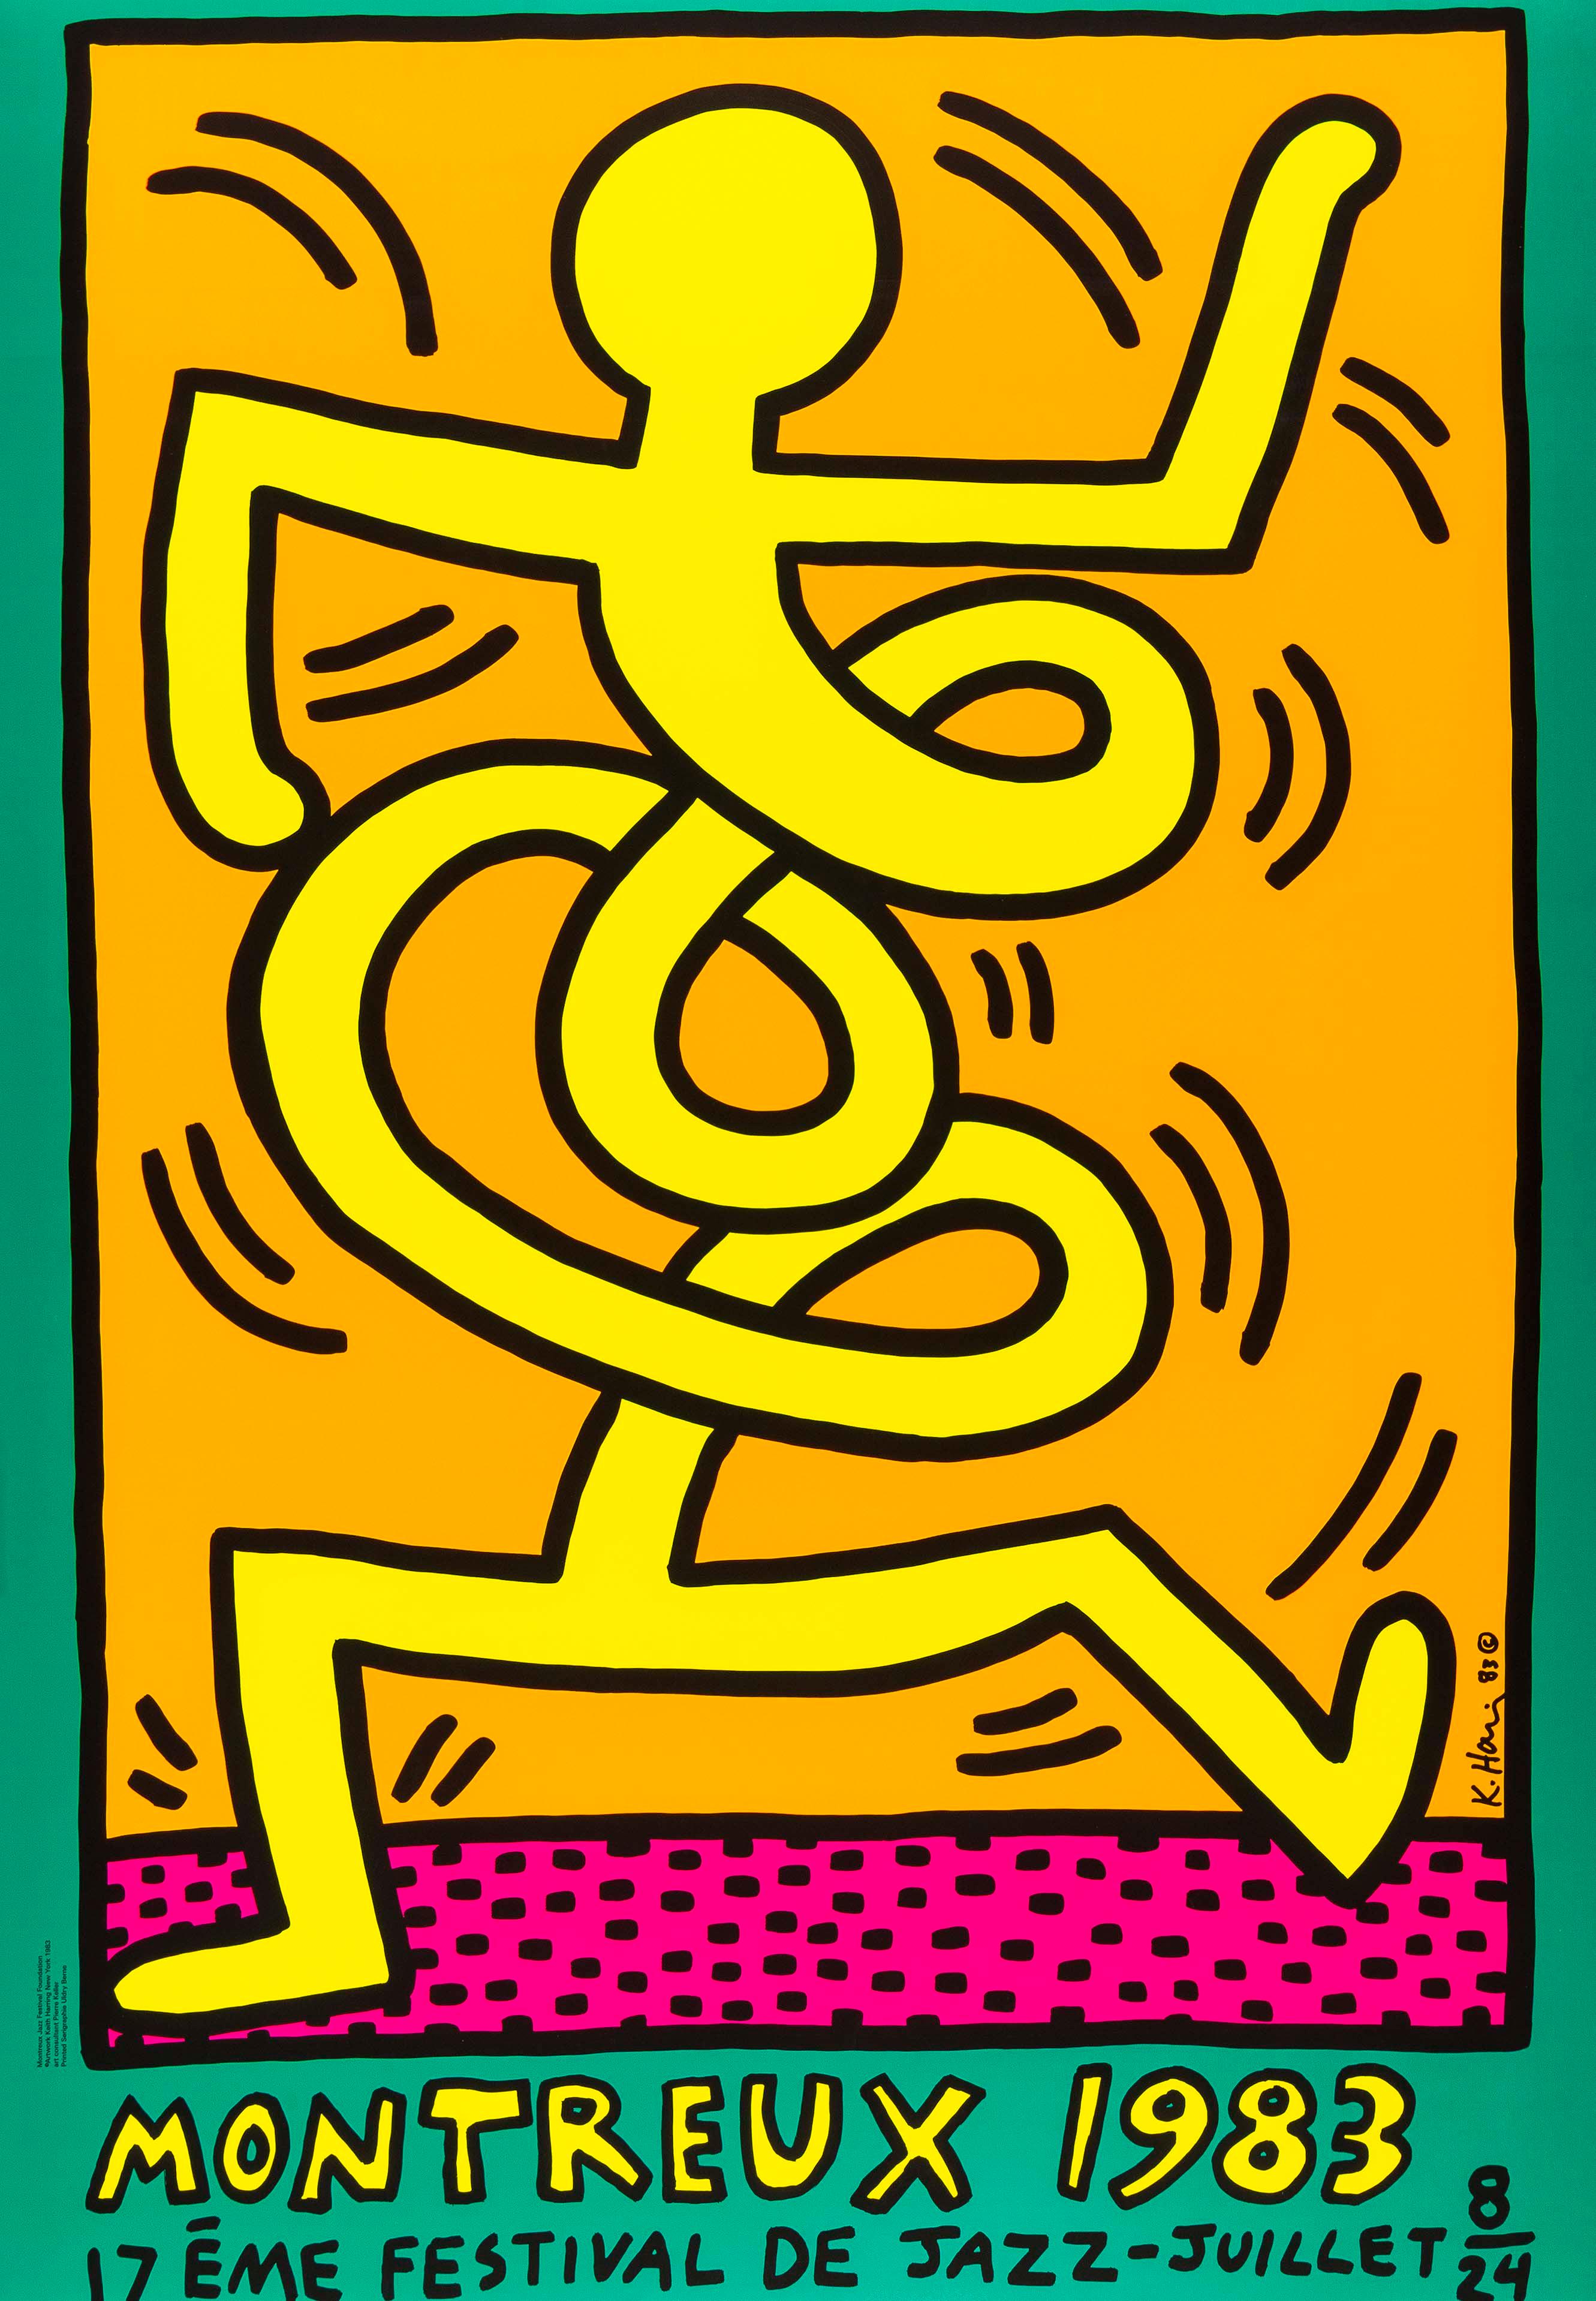 KEITH HARING
Montreux Jazz Festival, 1983

Screenprint in colours, on wove
Printed by Serigraphie Uldry Bern, Switzerland
Published for the Montreux Jazz Festival
Sheet:  100.0 × 70.0 cm (39.4 x 27.5 in)